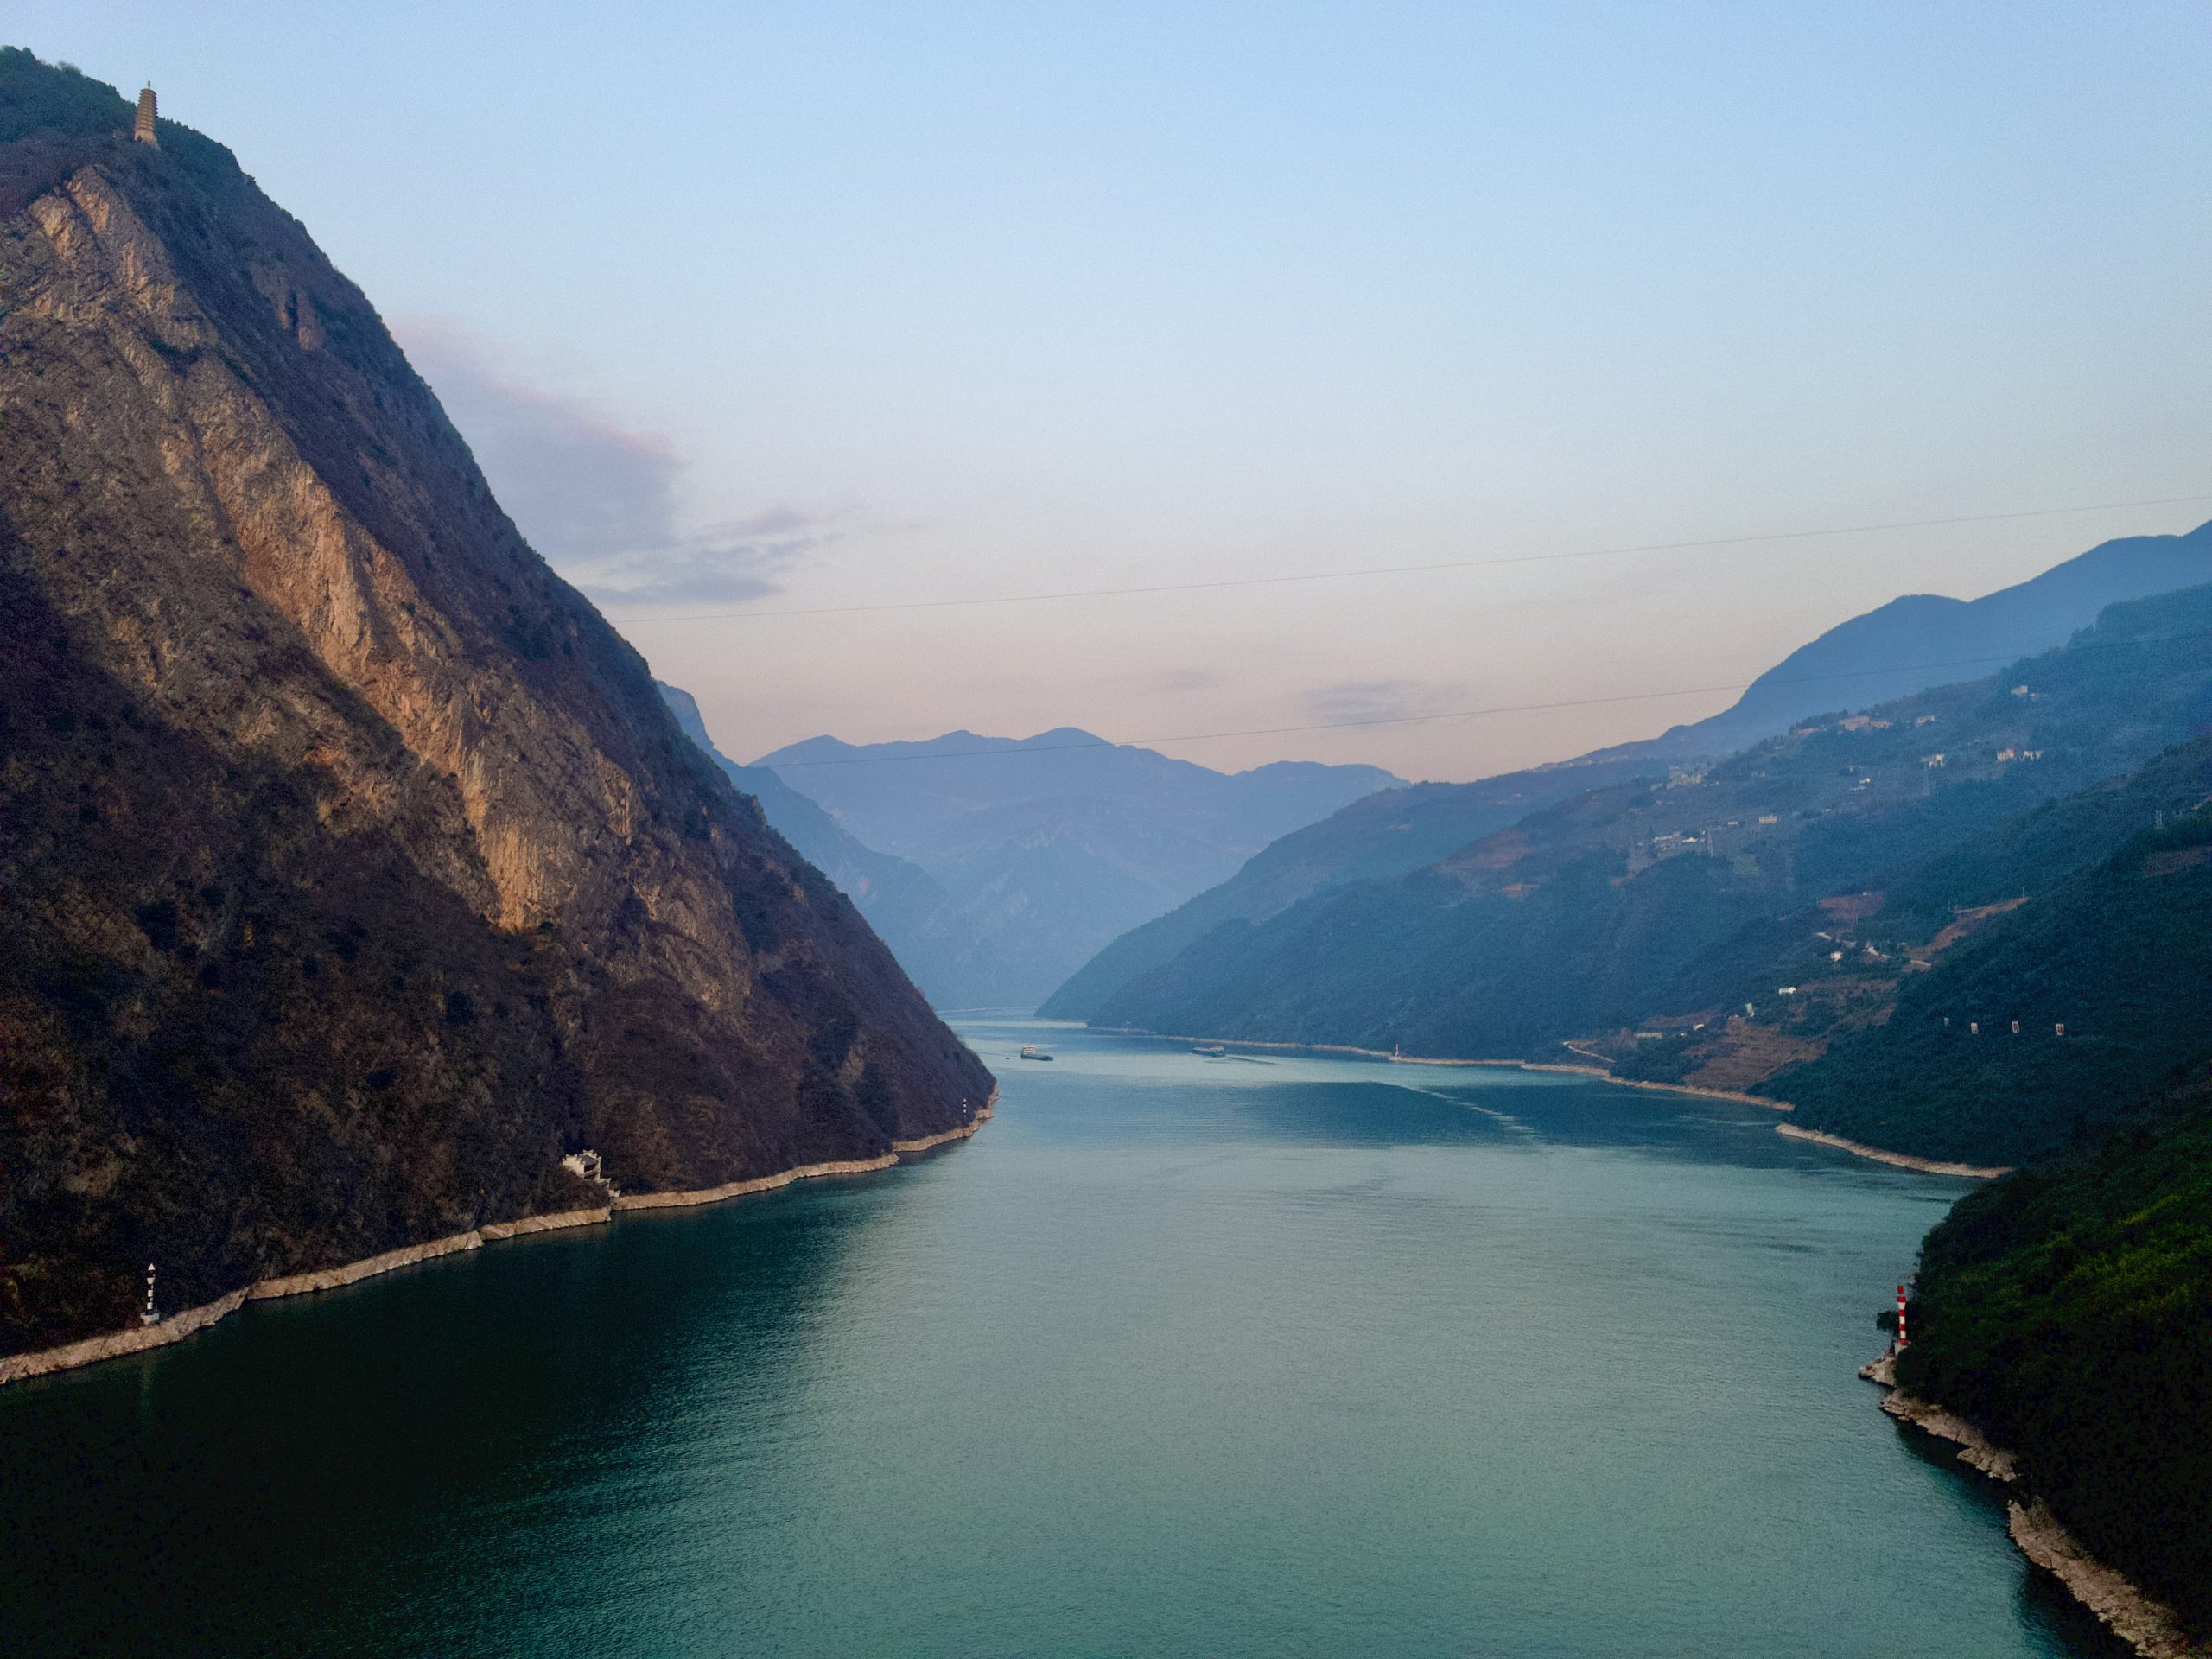 explore the magnificent yangtze river, the longest river in asia, and discover its natural beauty and cultural significance in china.